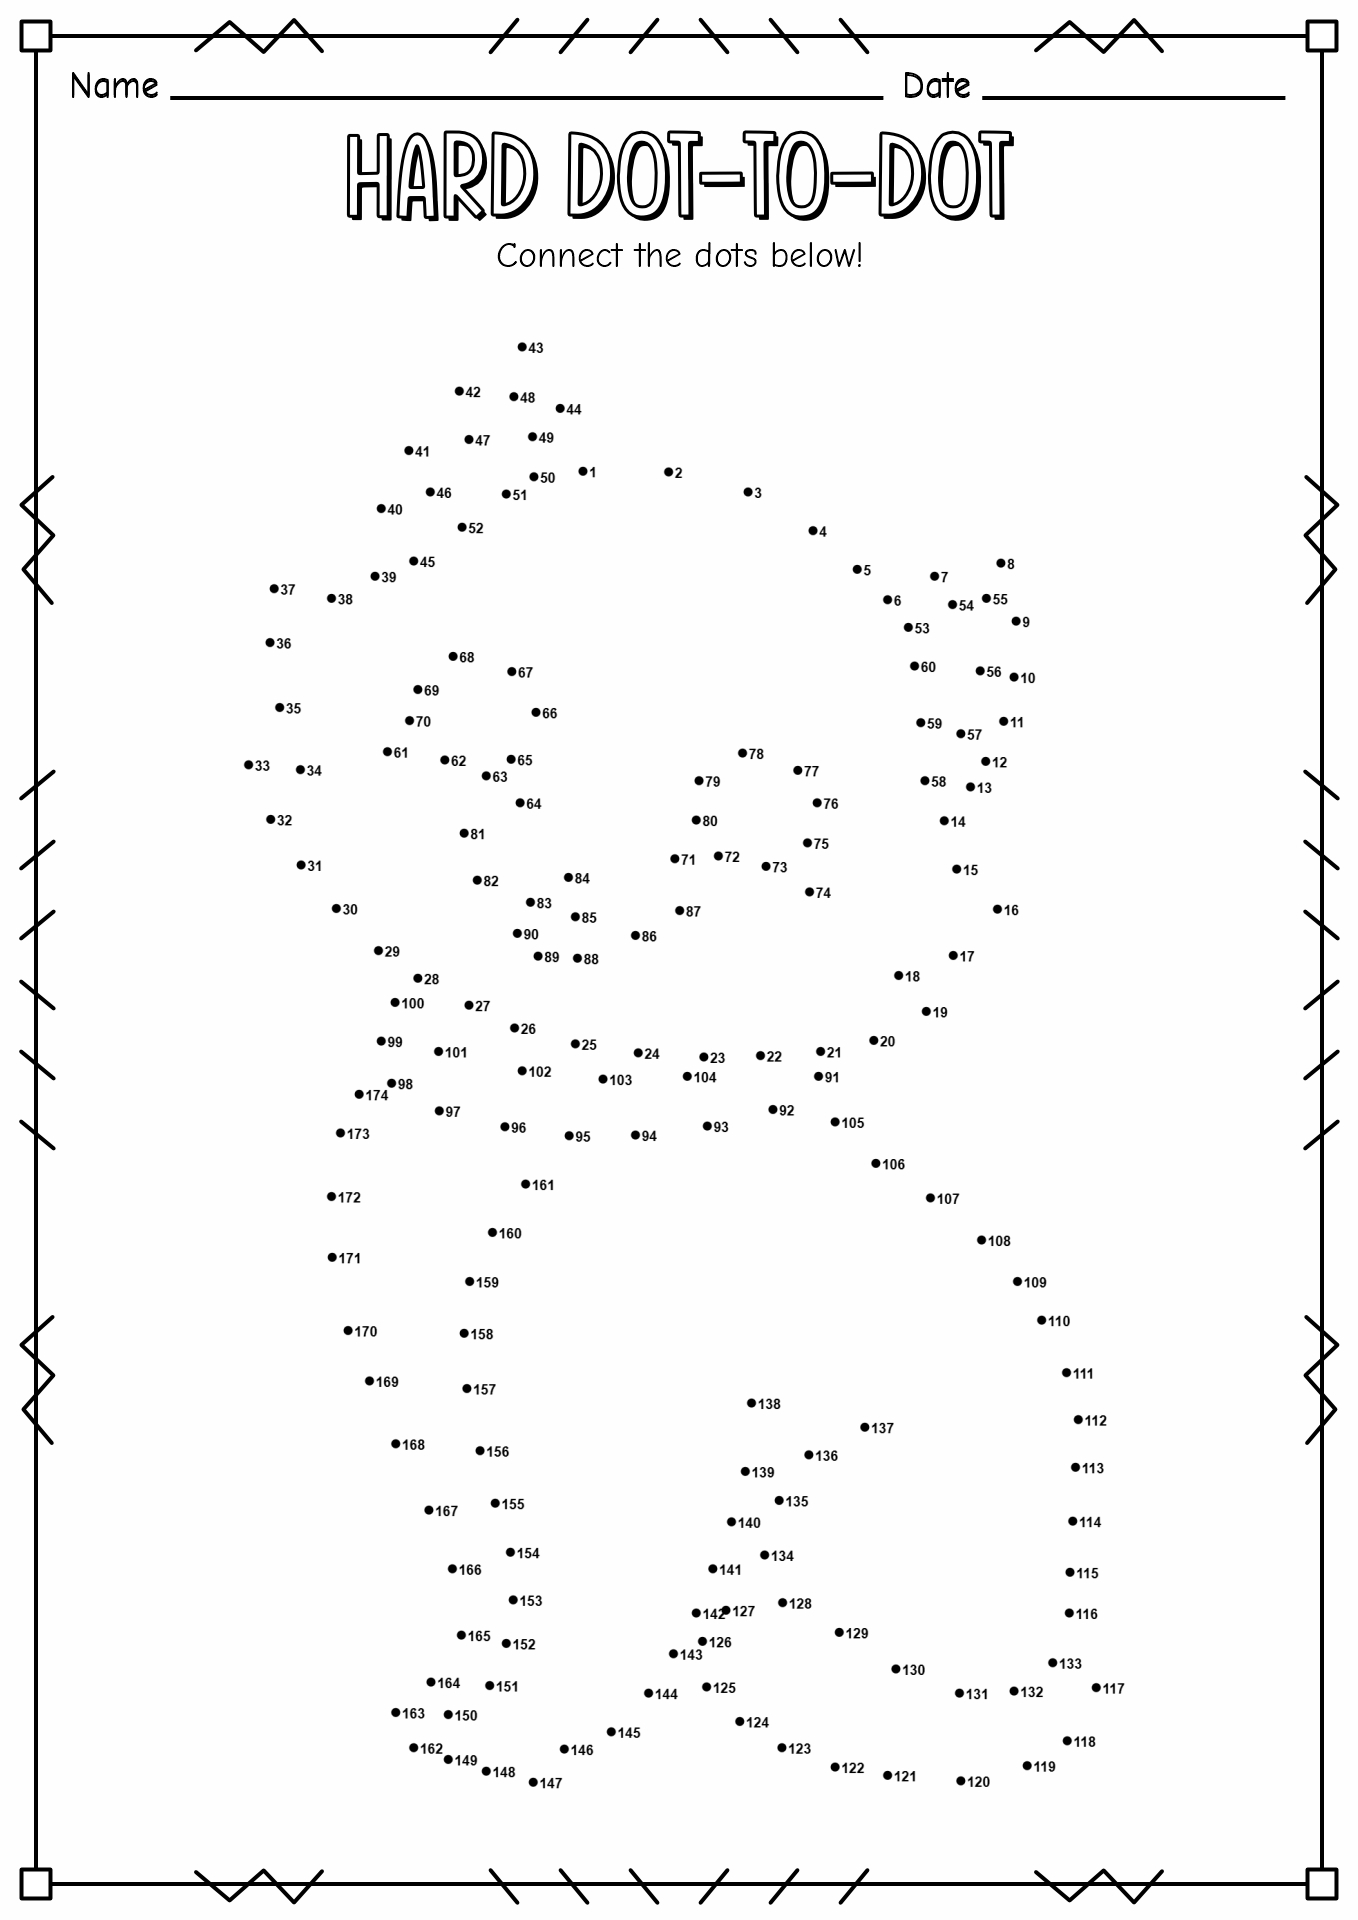 Hard Adult Connect the Dots Image